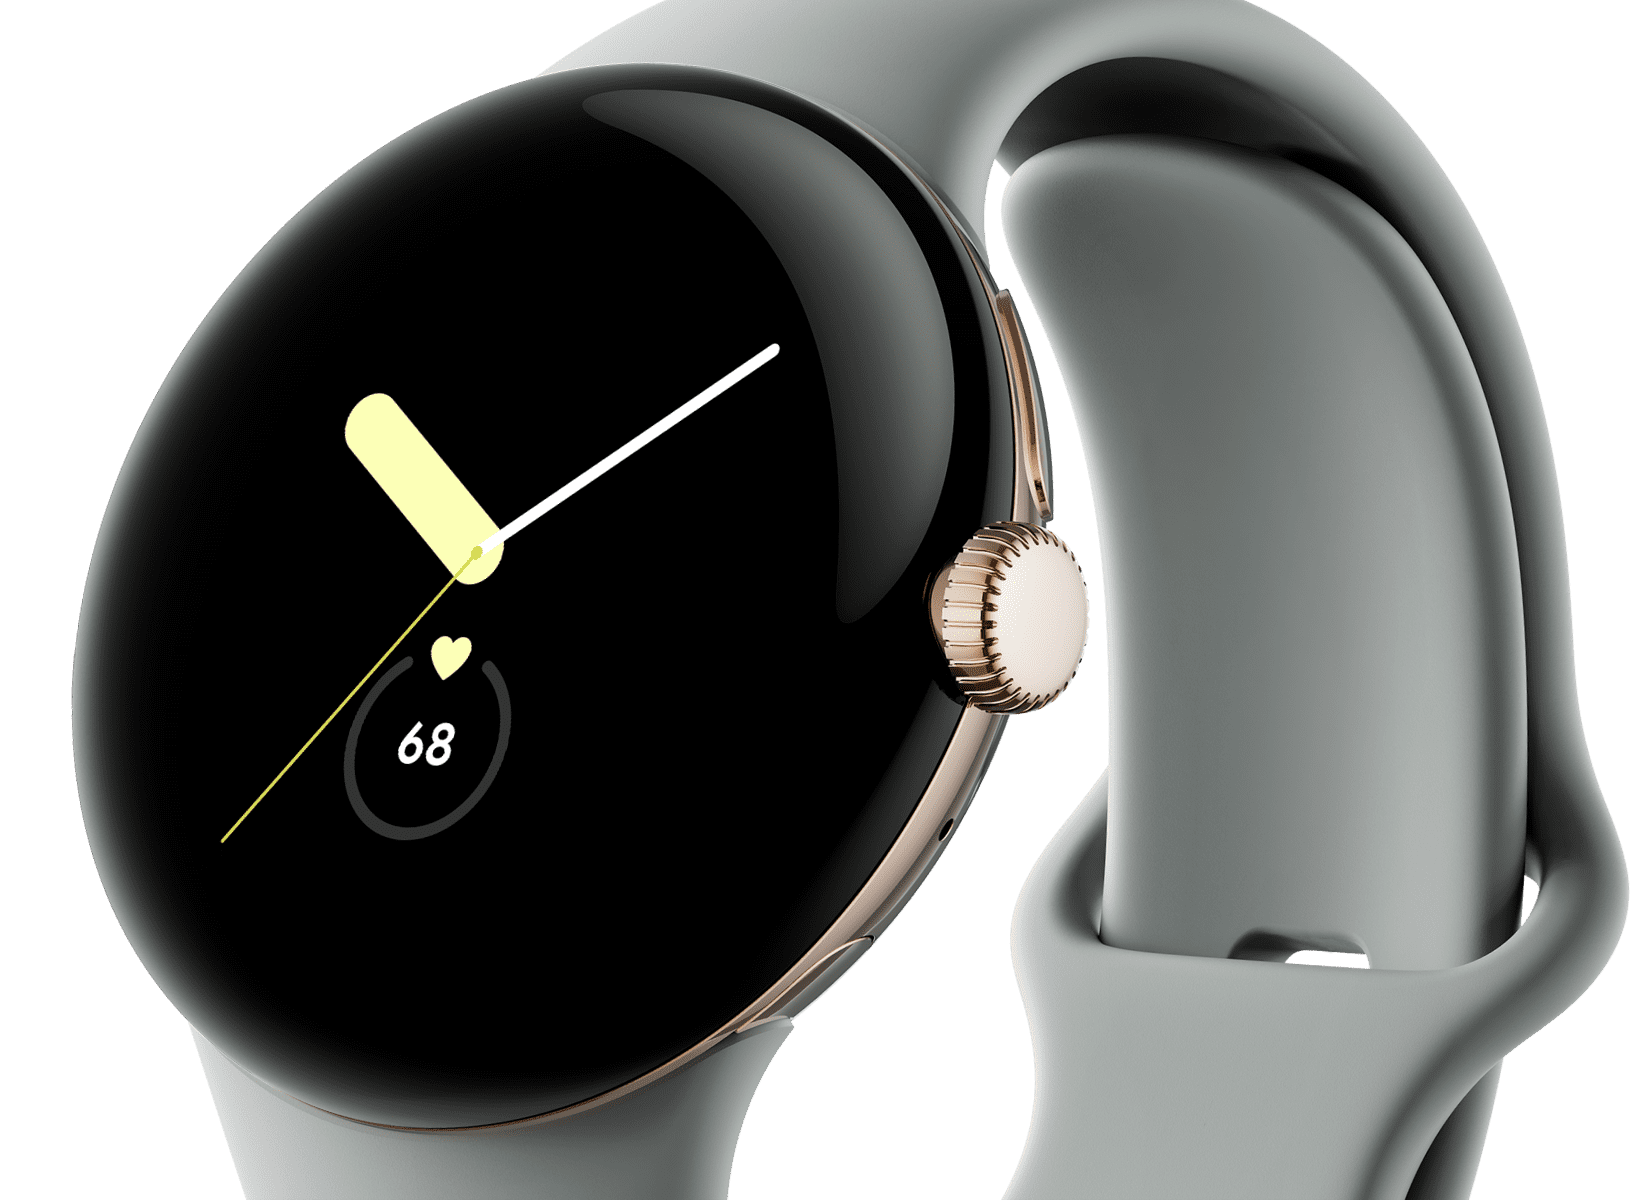 Google's Pixel Watch is finally here and it looks amazing